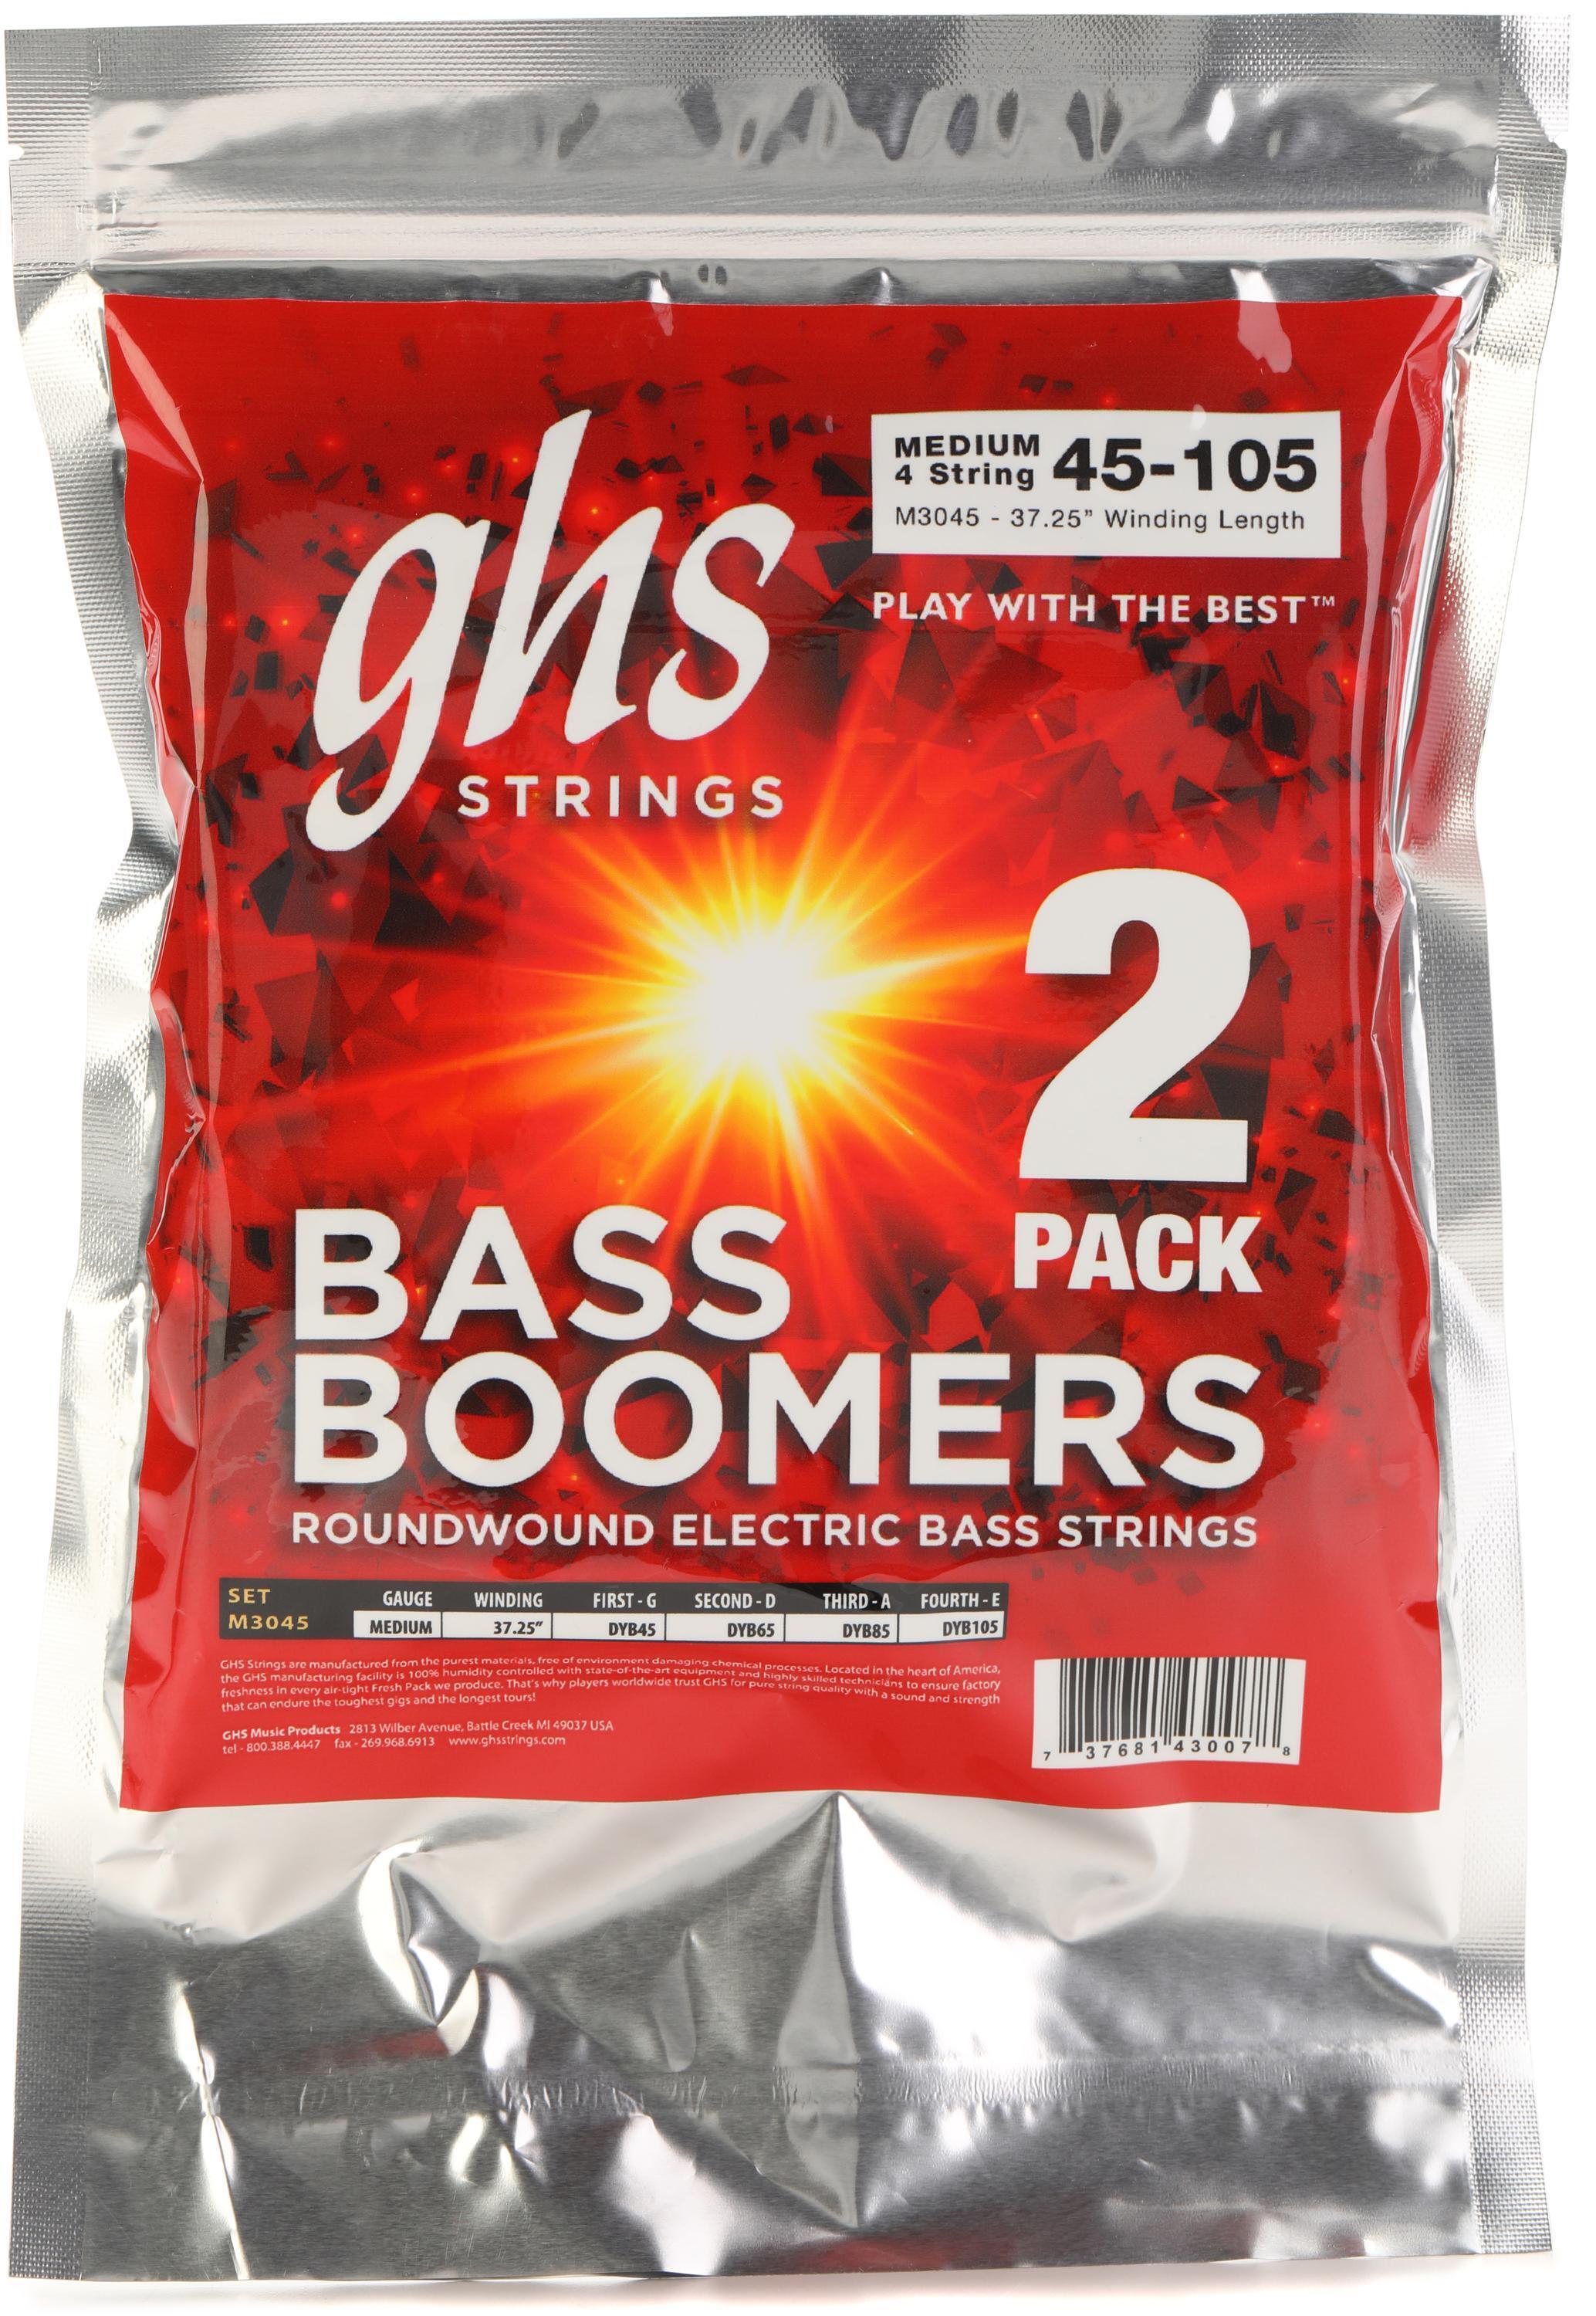 GHS M3045-2 Bass Boomers Roundwound Electric Bass Guitar Strings -  .045-.105 Medium Long Scale (2-pack) Reviews | Sweetwater